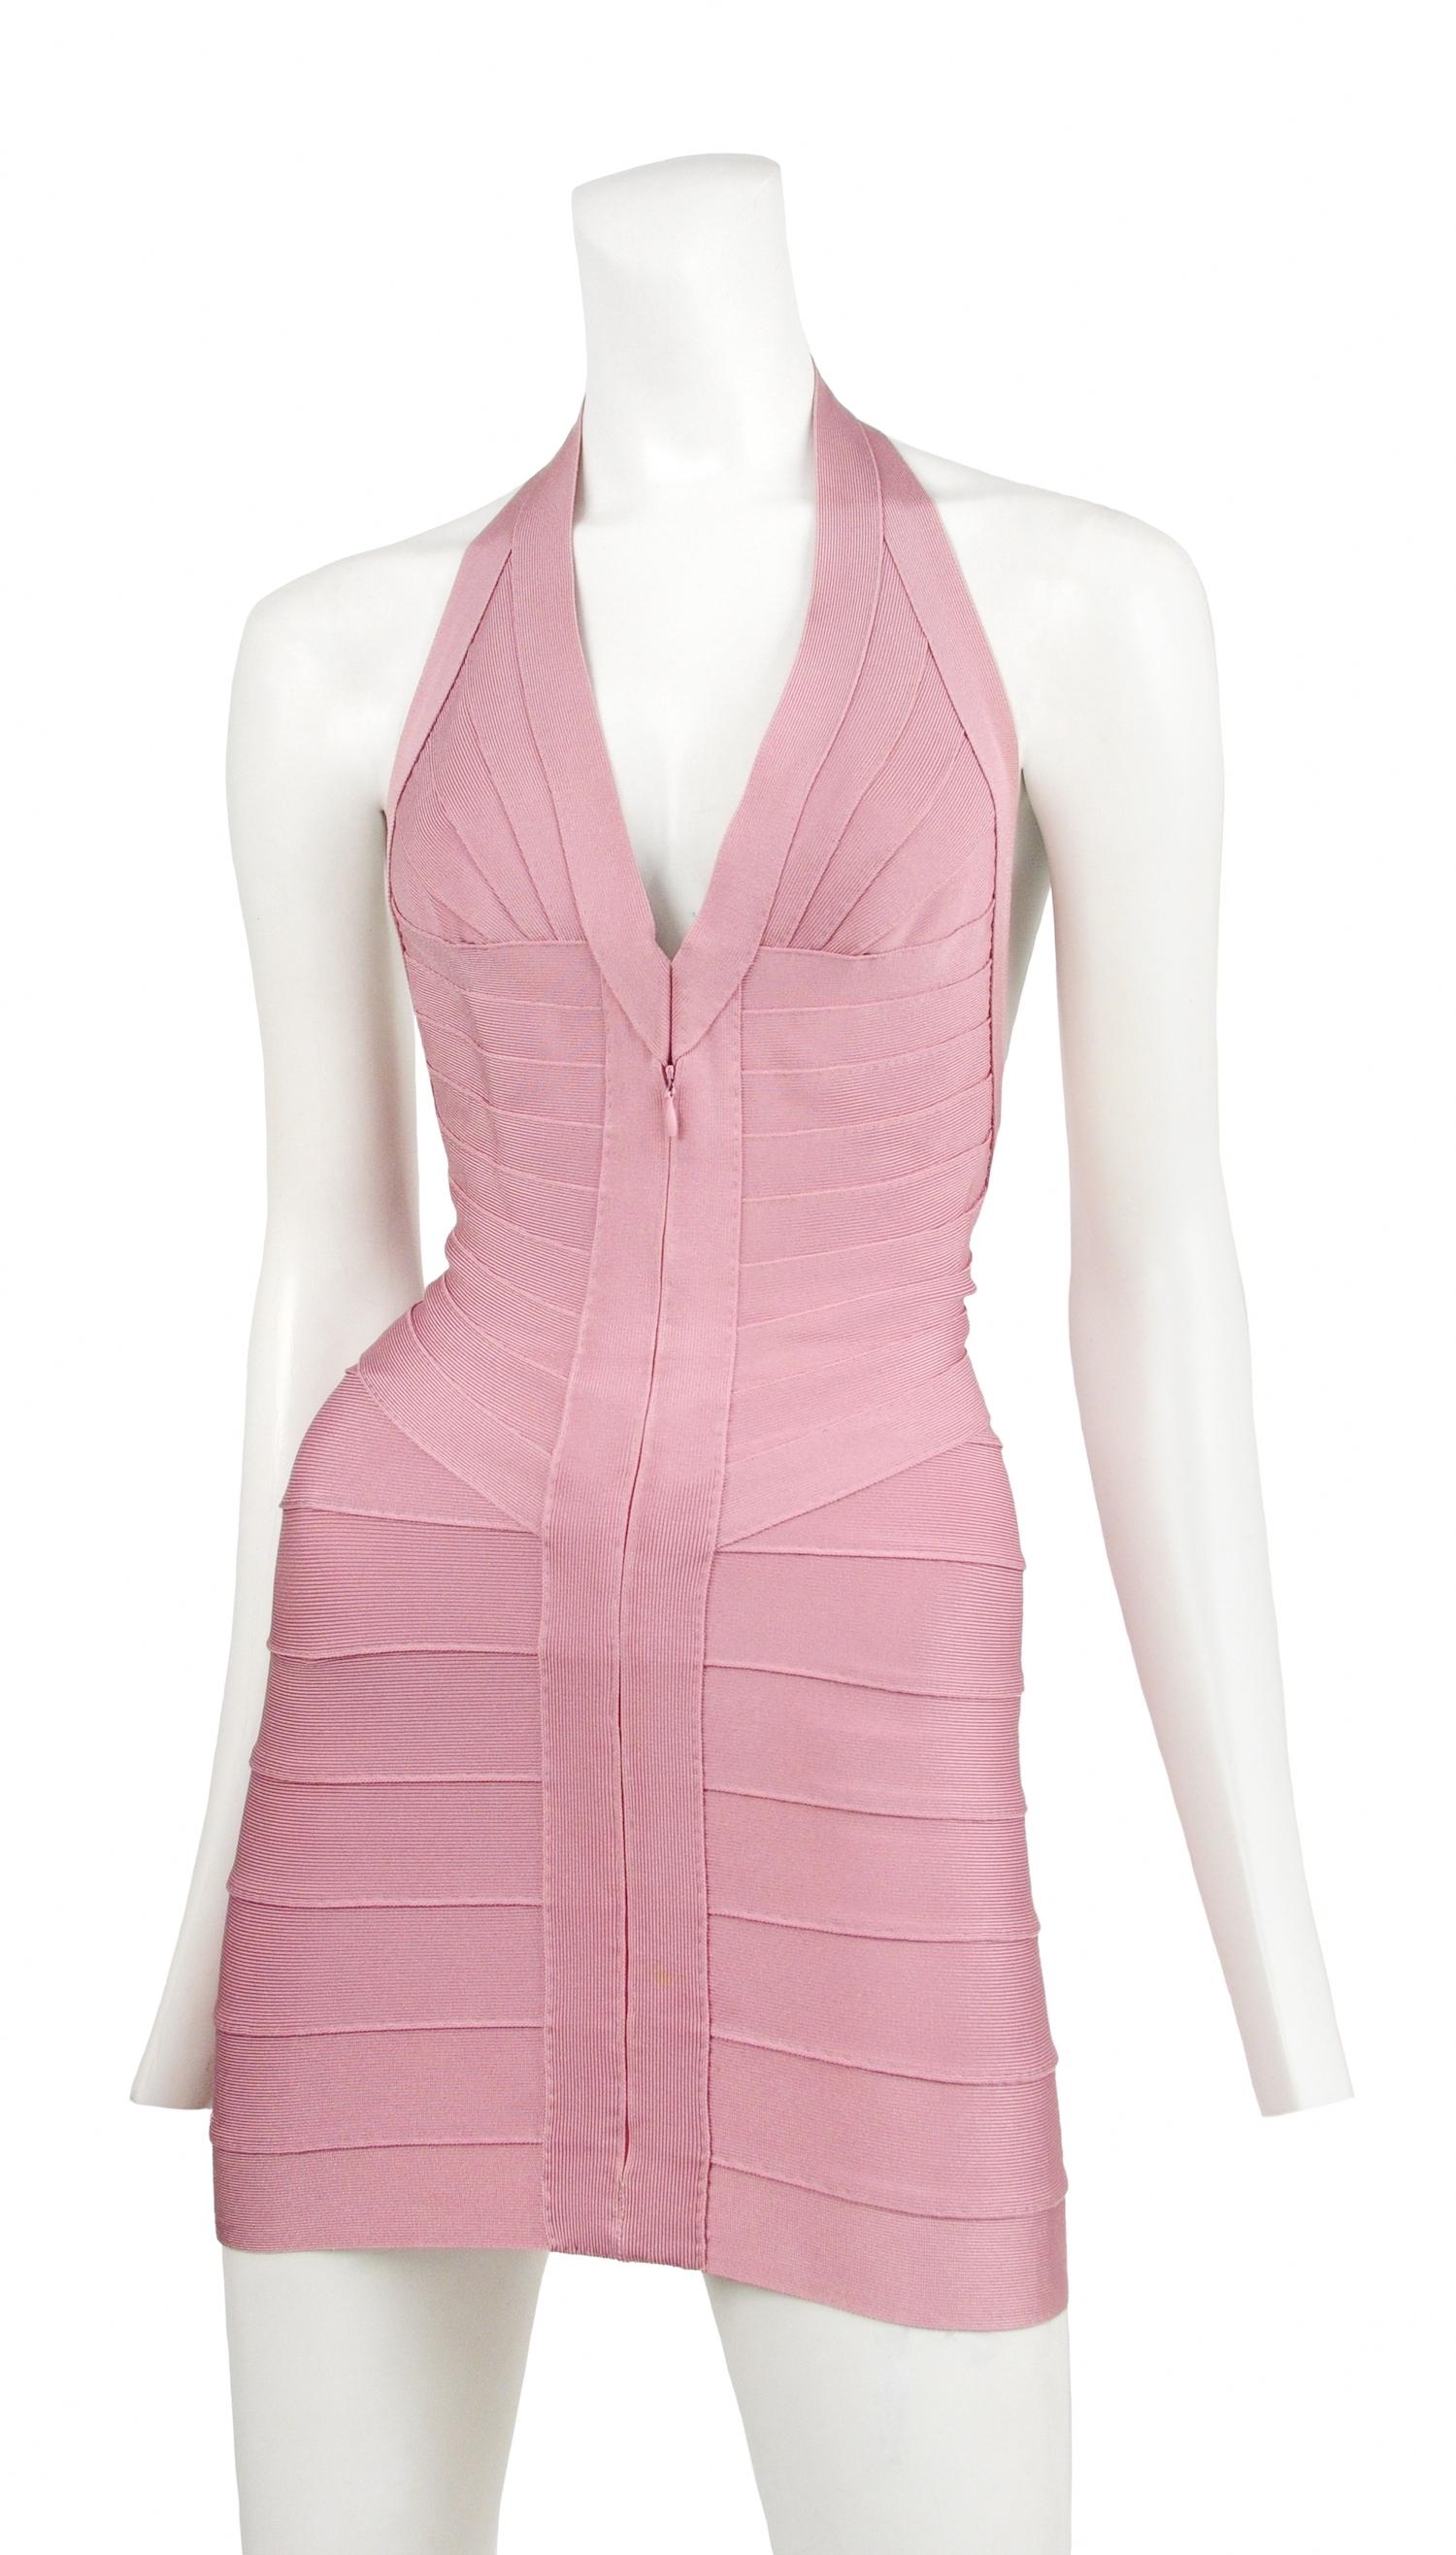 Herve Leger classic rose pink bandage halter mini dress in rose pink. Features deep V neckline, hook and eye closure at neckline, full zipper at center front, and open back. Hand stitched and made in France.

Excellent Vintage Condition.